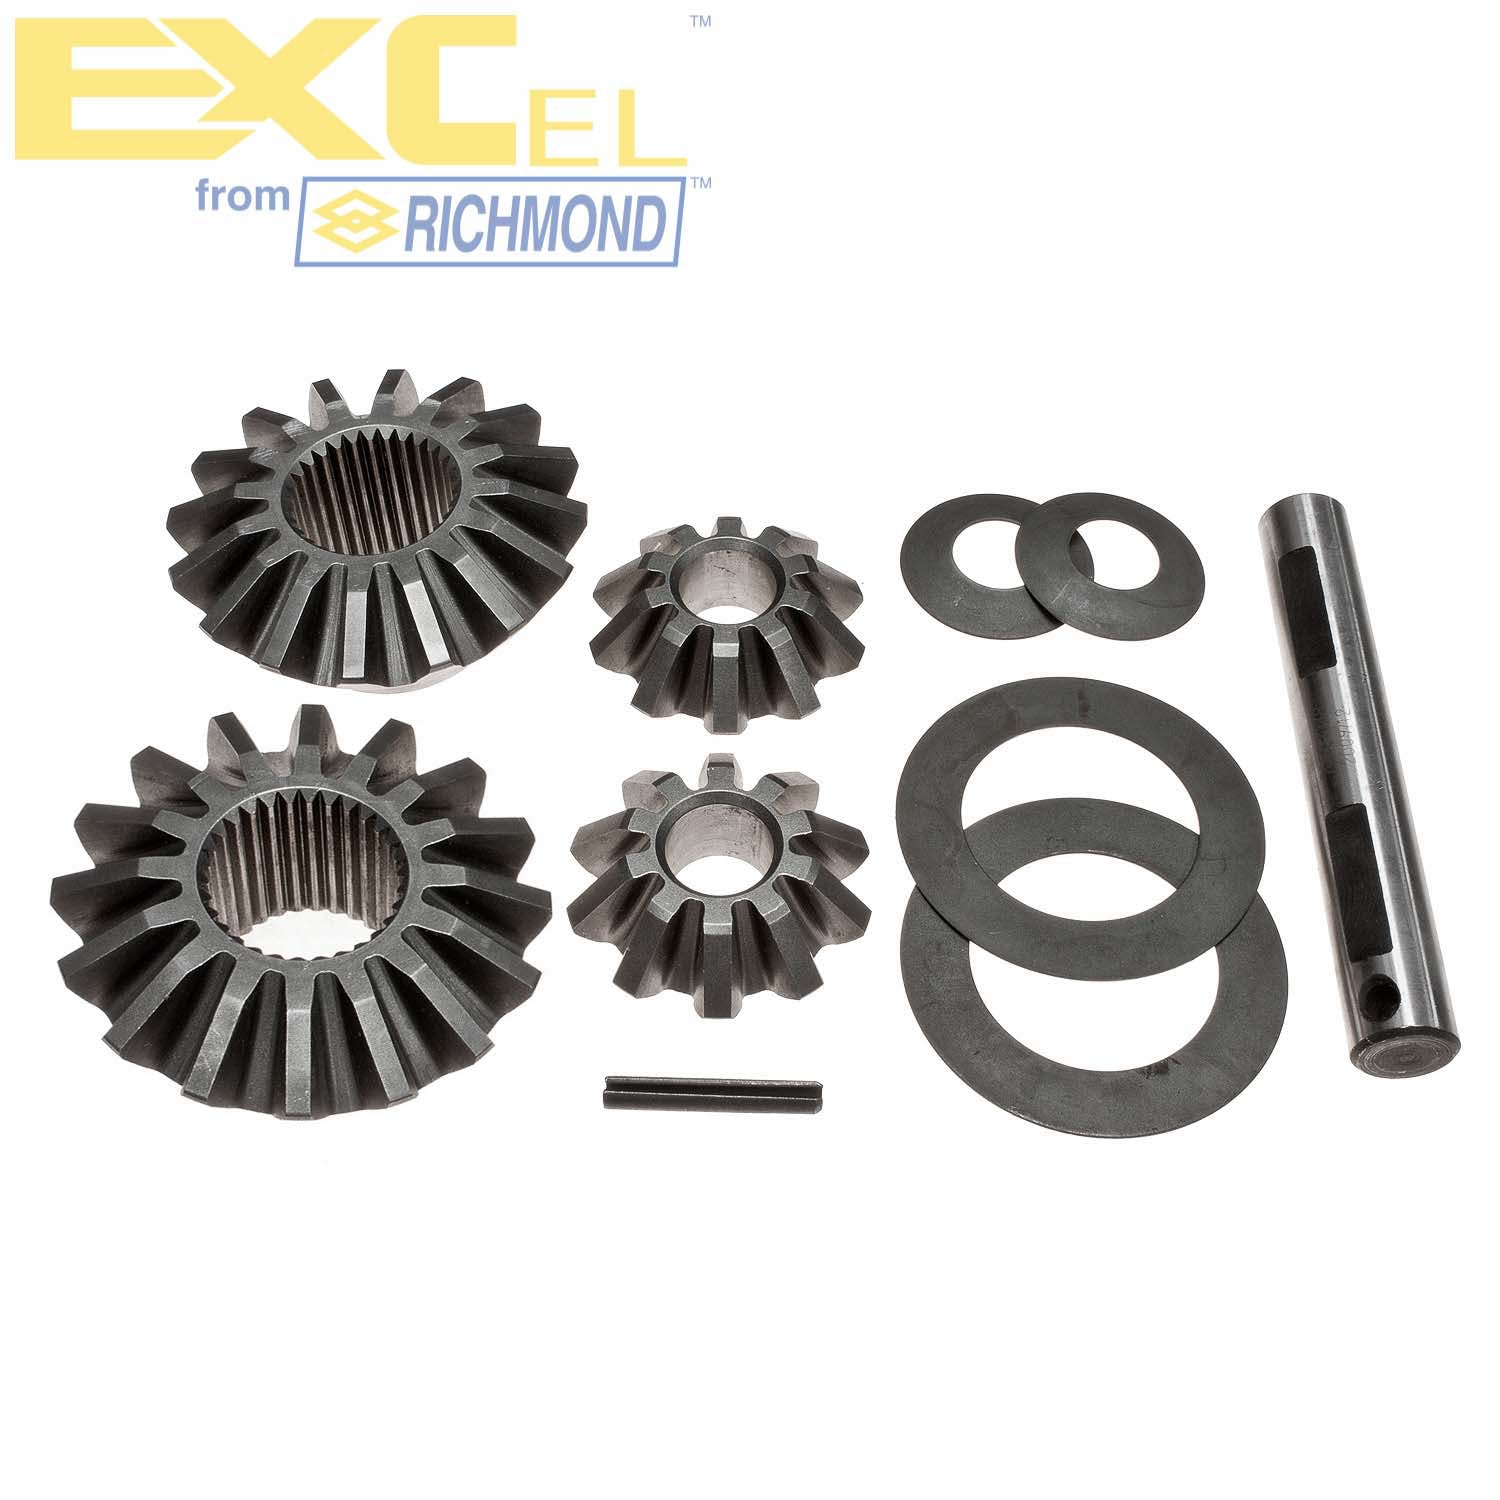 Excel XL-4070 Differential Carrier Gear Kit